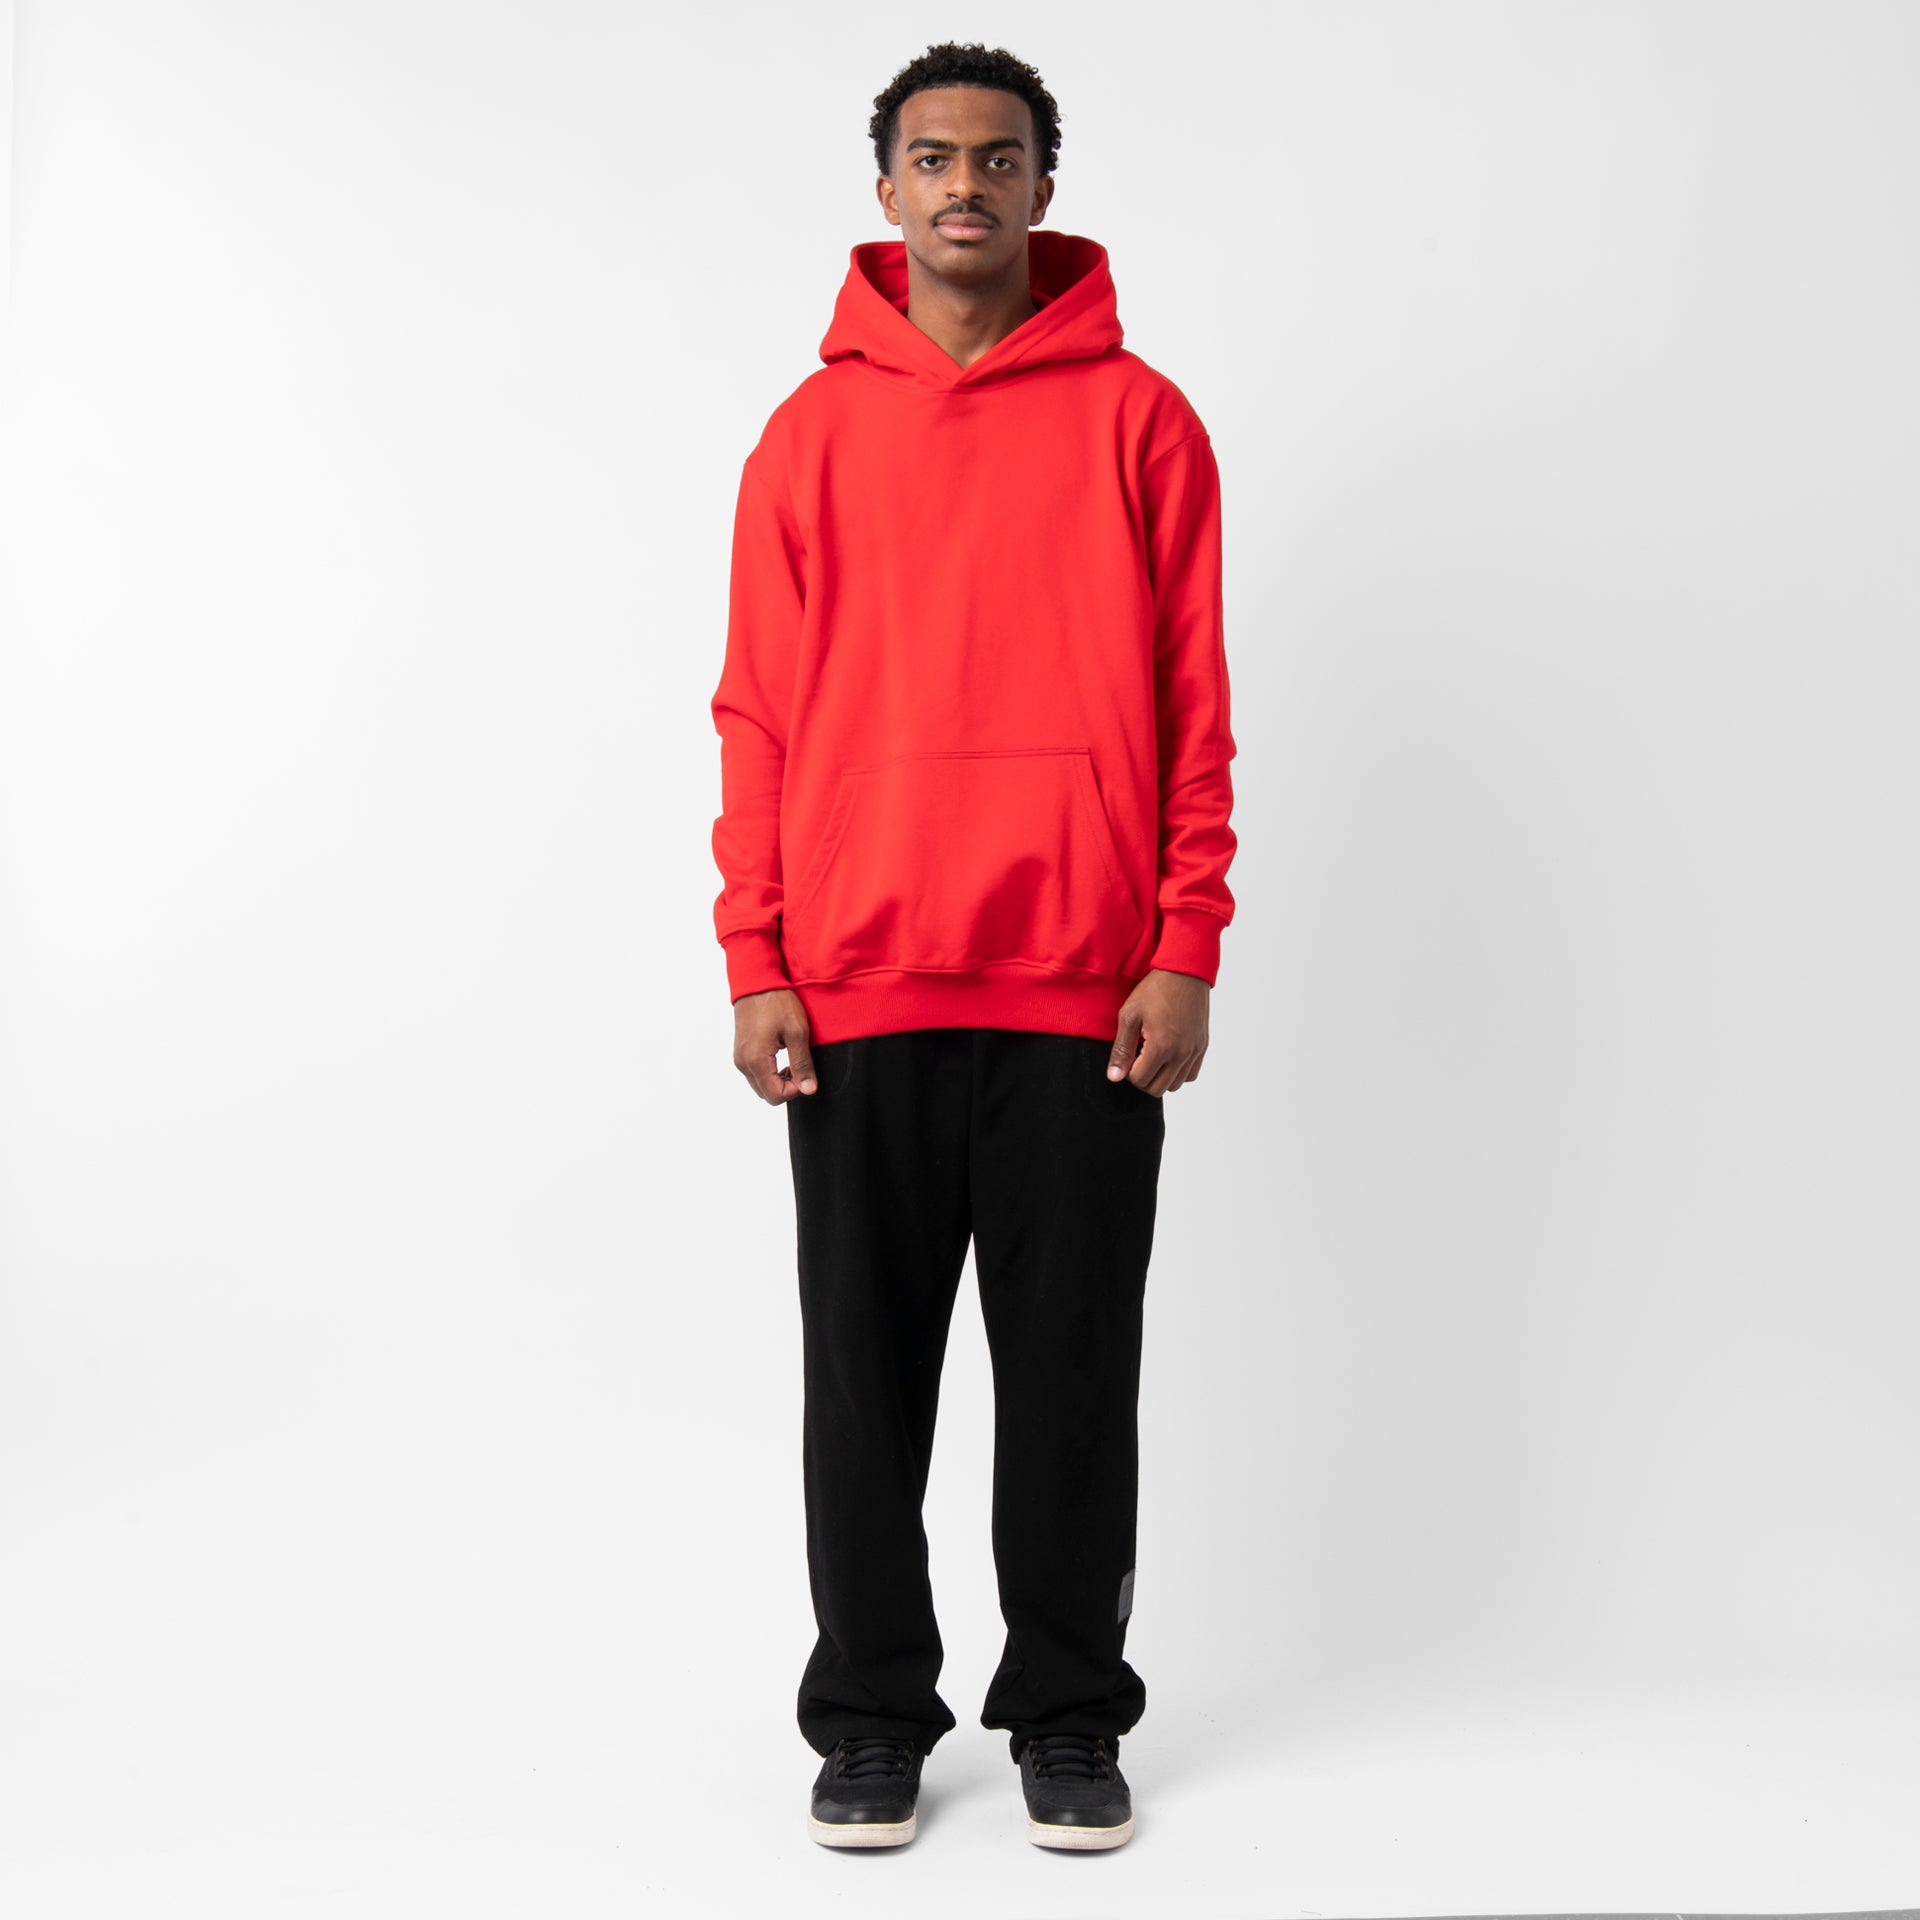 Red Hoodie From Tripe Four